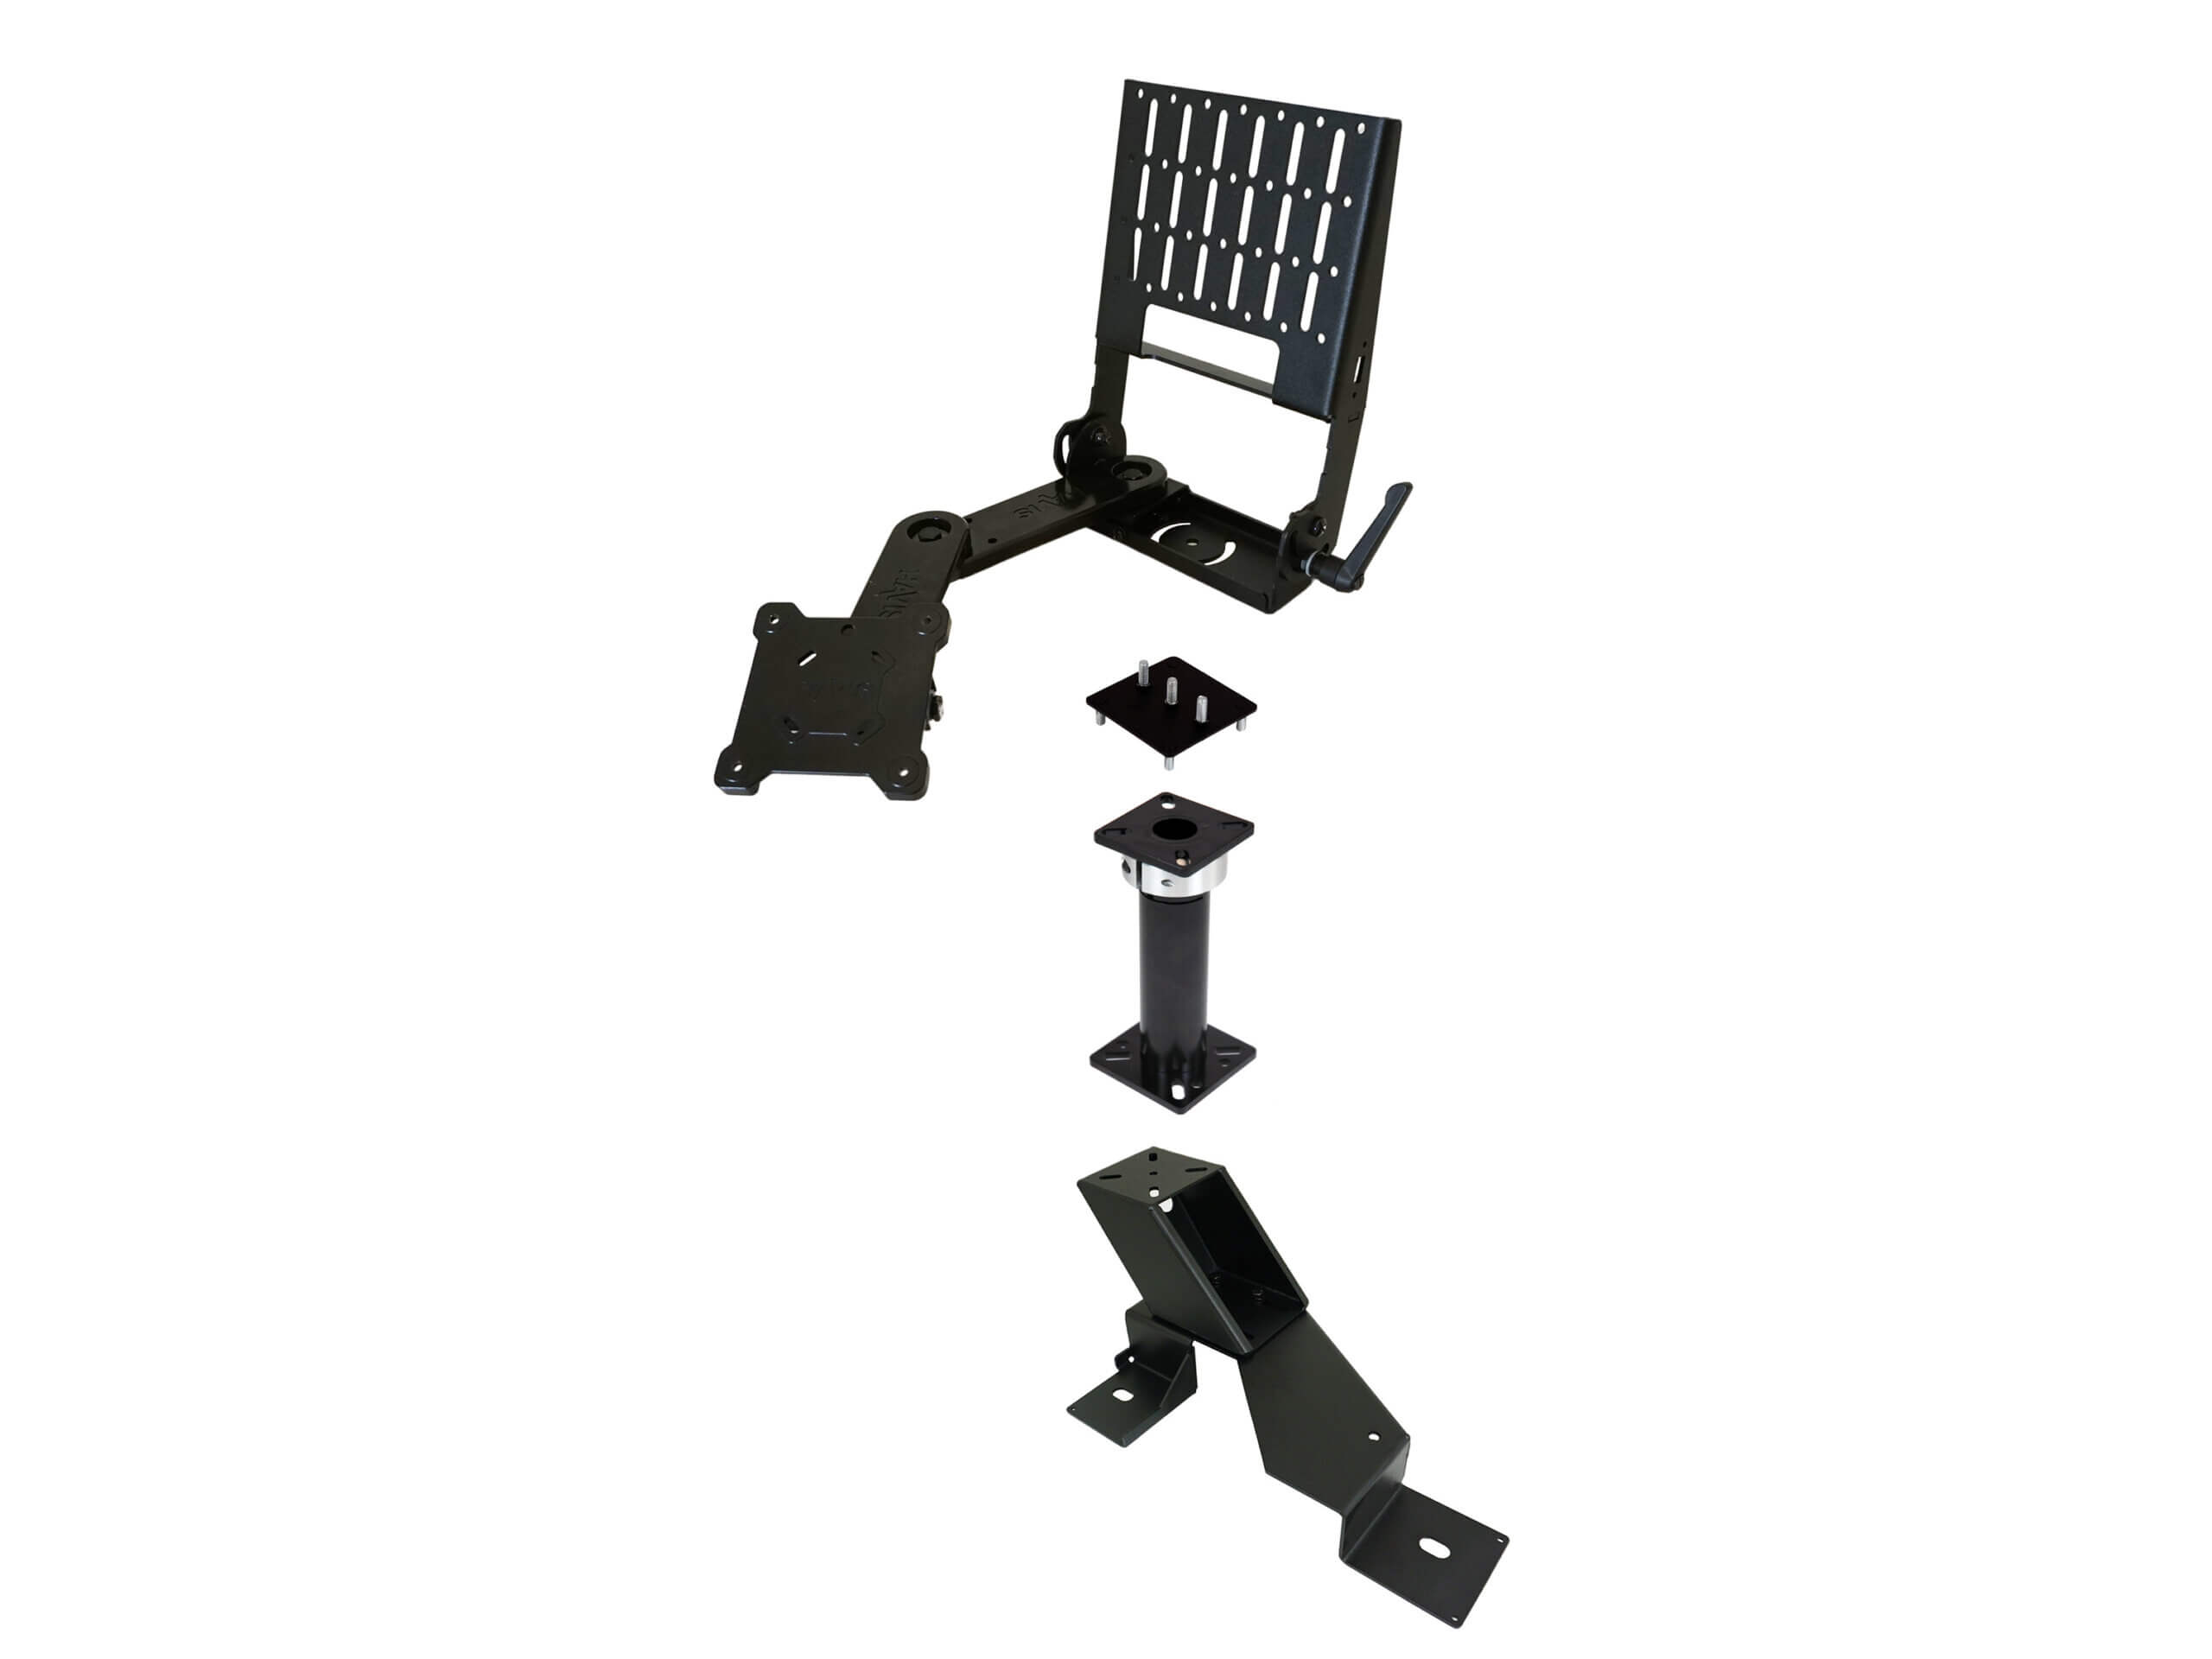 Standard Tablet Pedestal Mount Package For Ford 2018-2023 Expedition, Ford 2015-2023 F-150, 2017-2023 F-250, F-350, F-450, F-250, F-350, F-450, F-550 Chassis Cab, and 2022-2023 Ford F-150 Lightning